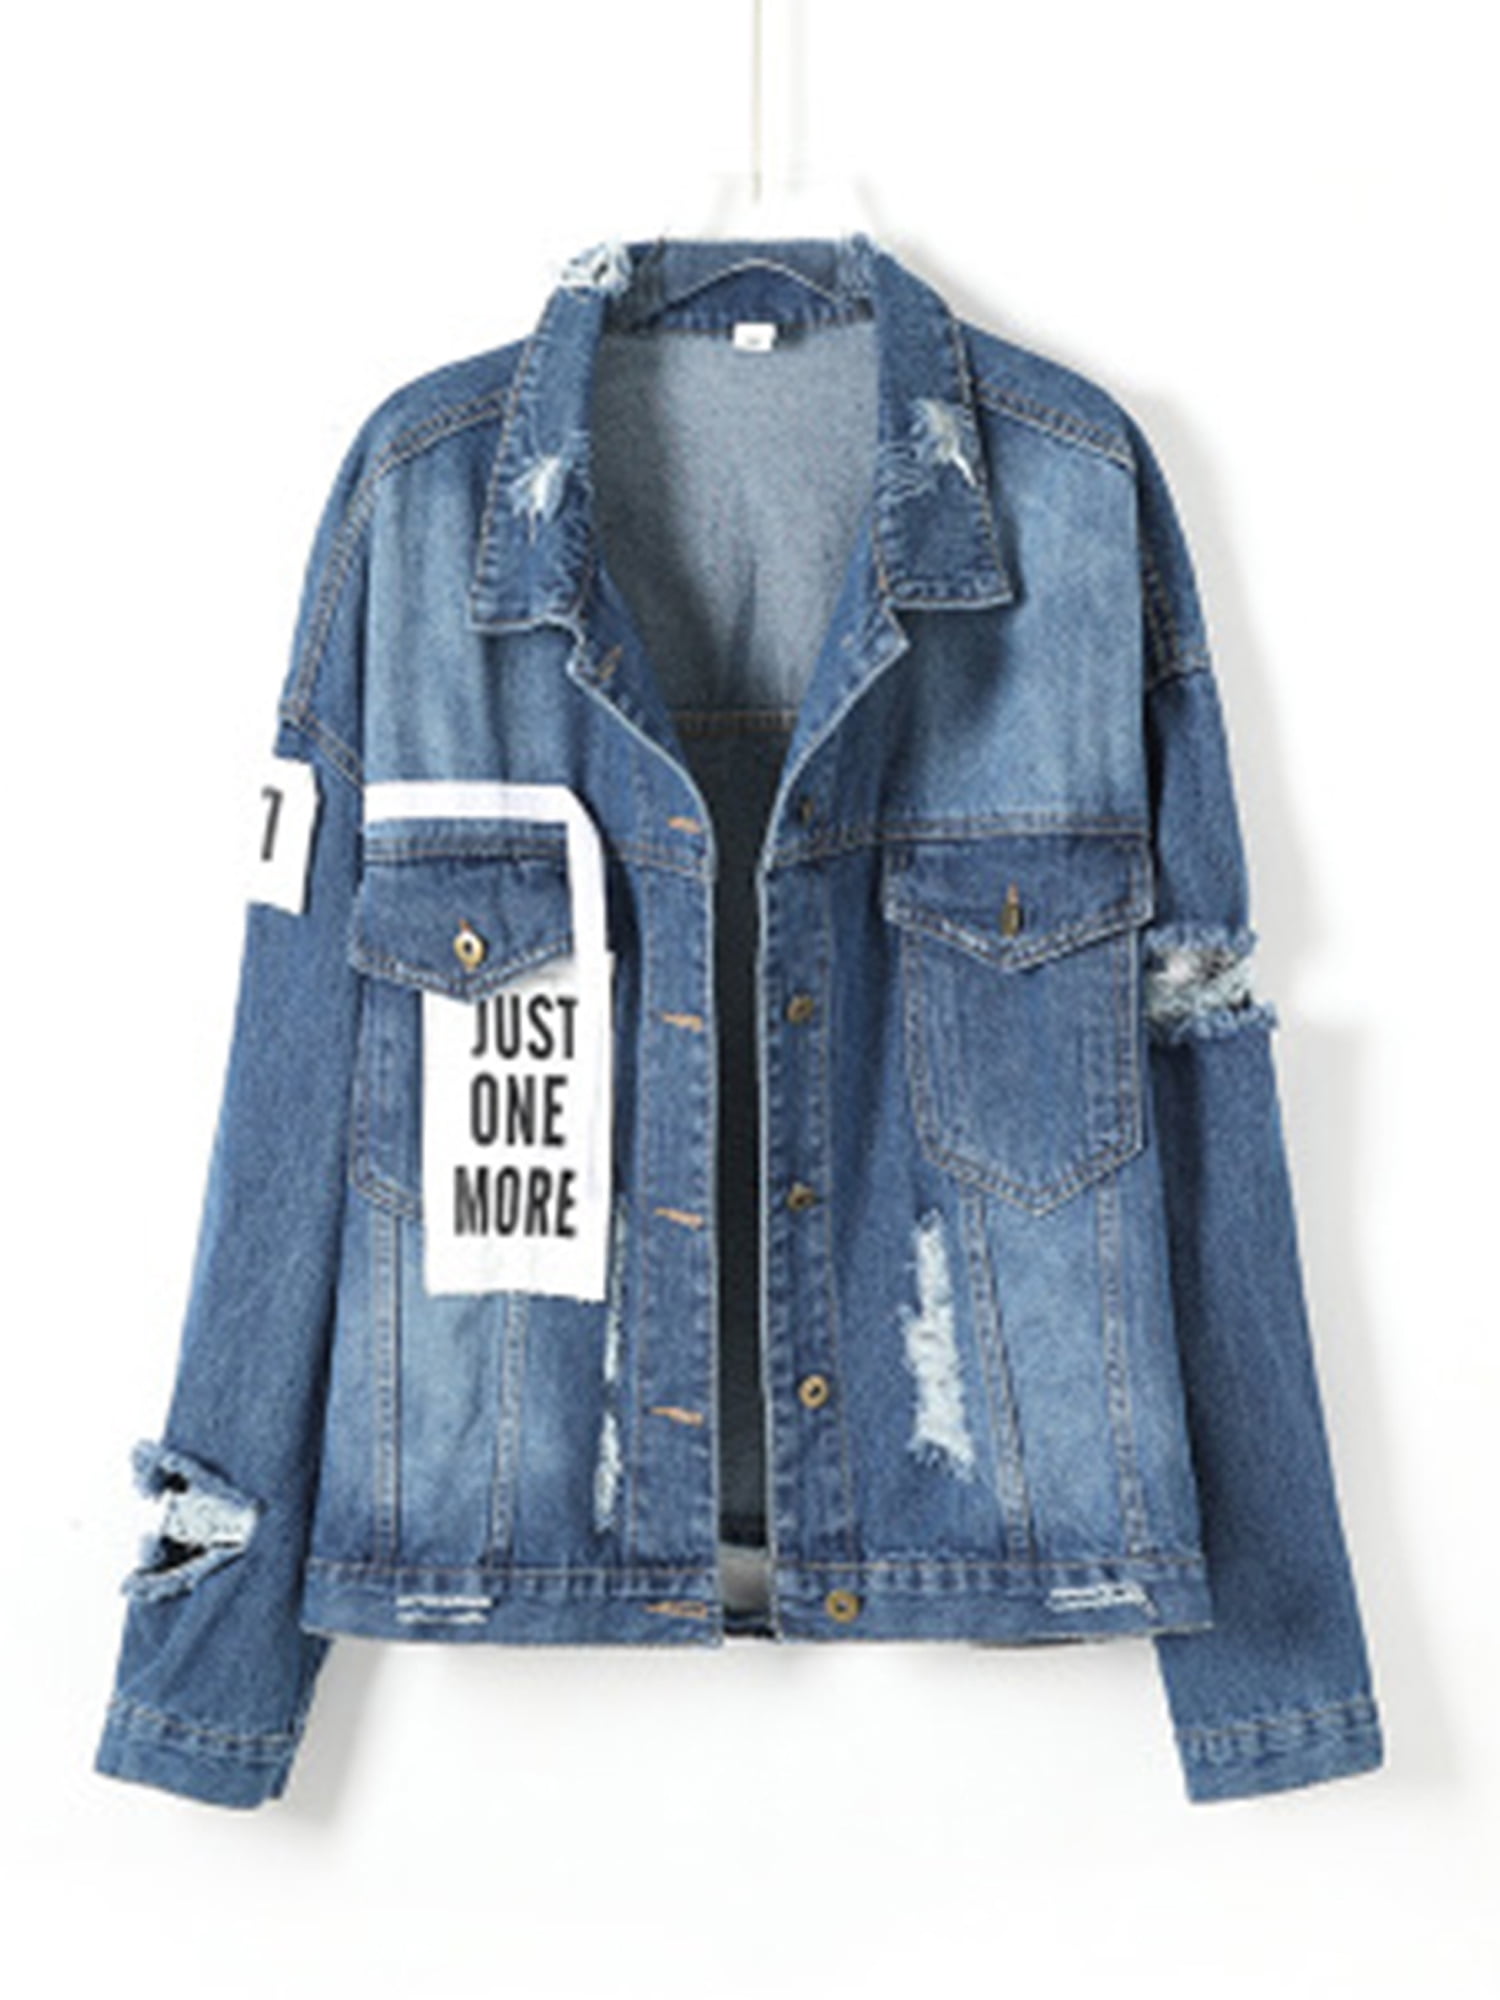 SELX Men Fashion Wash Letters Print Hole Ripped Distressed Buttons Jeans Coat